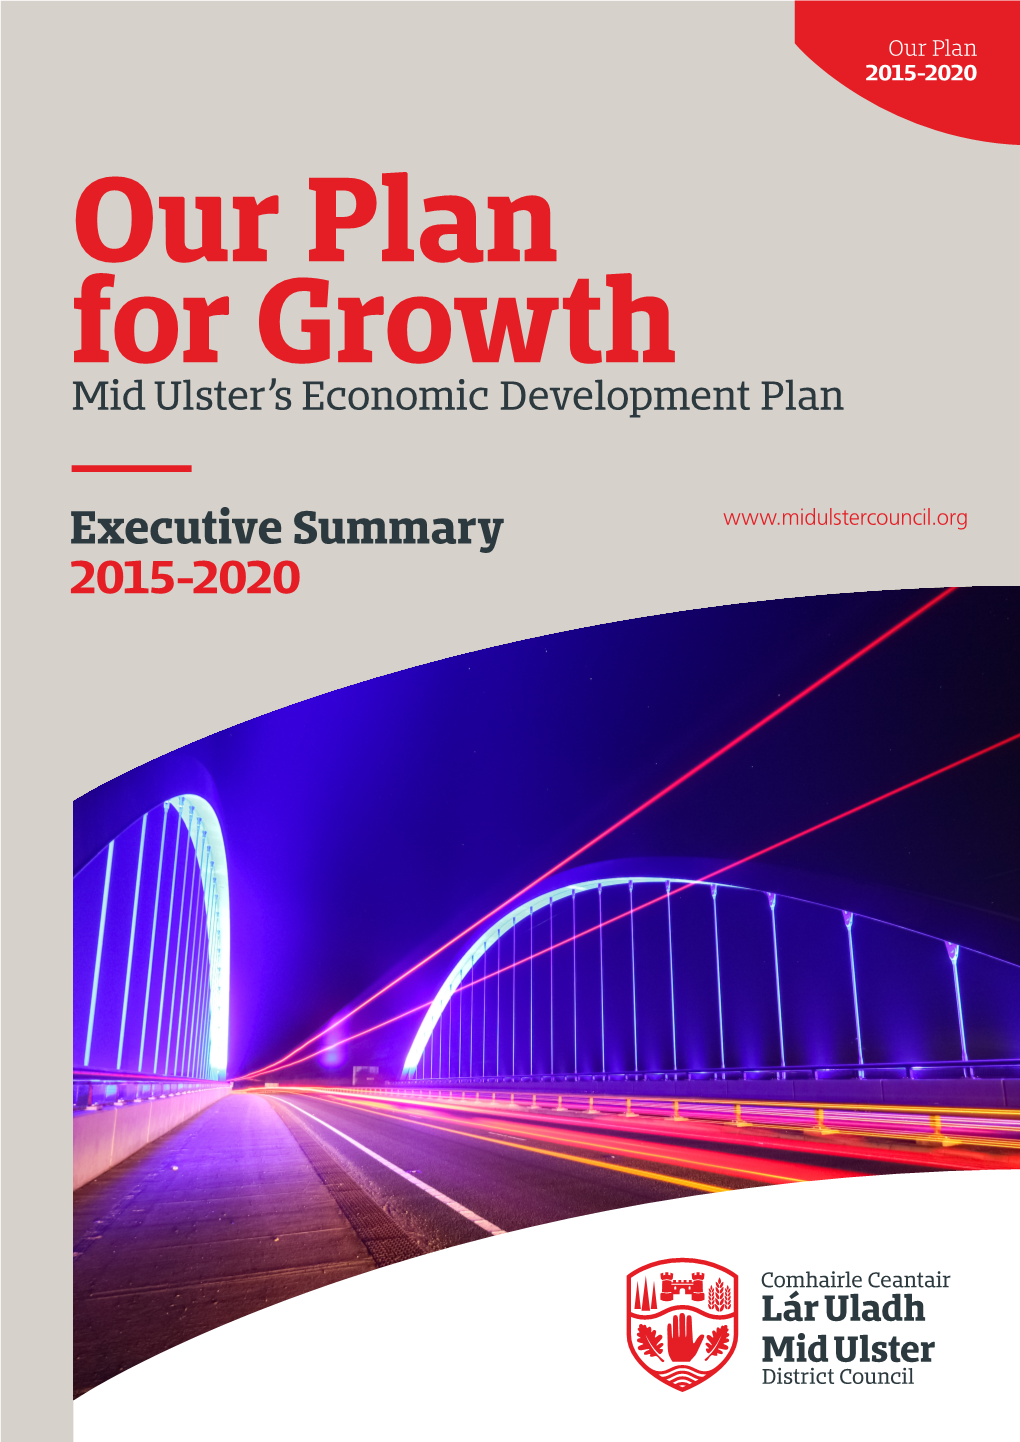 Our Plan for Growth: Economic Development Strategy 2015-2020